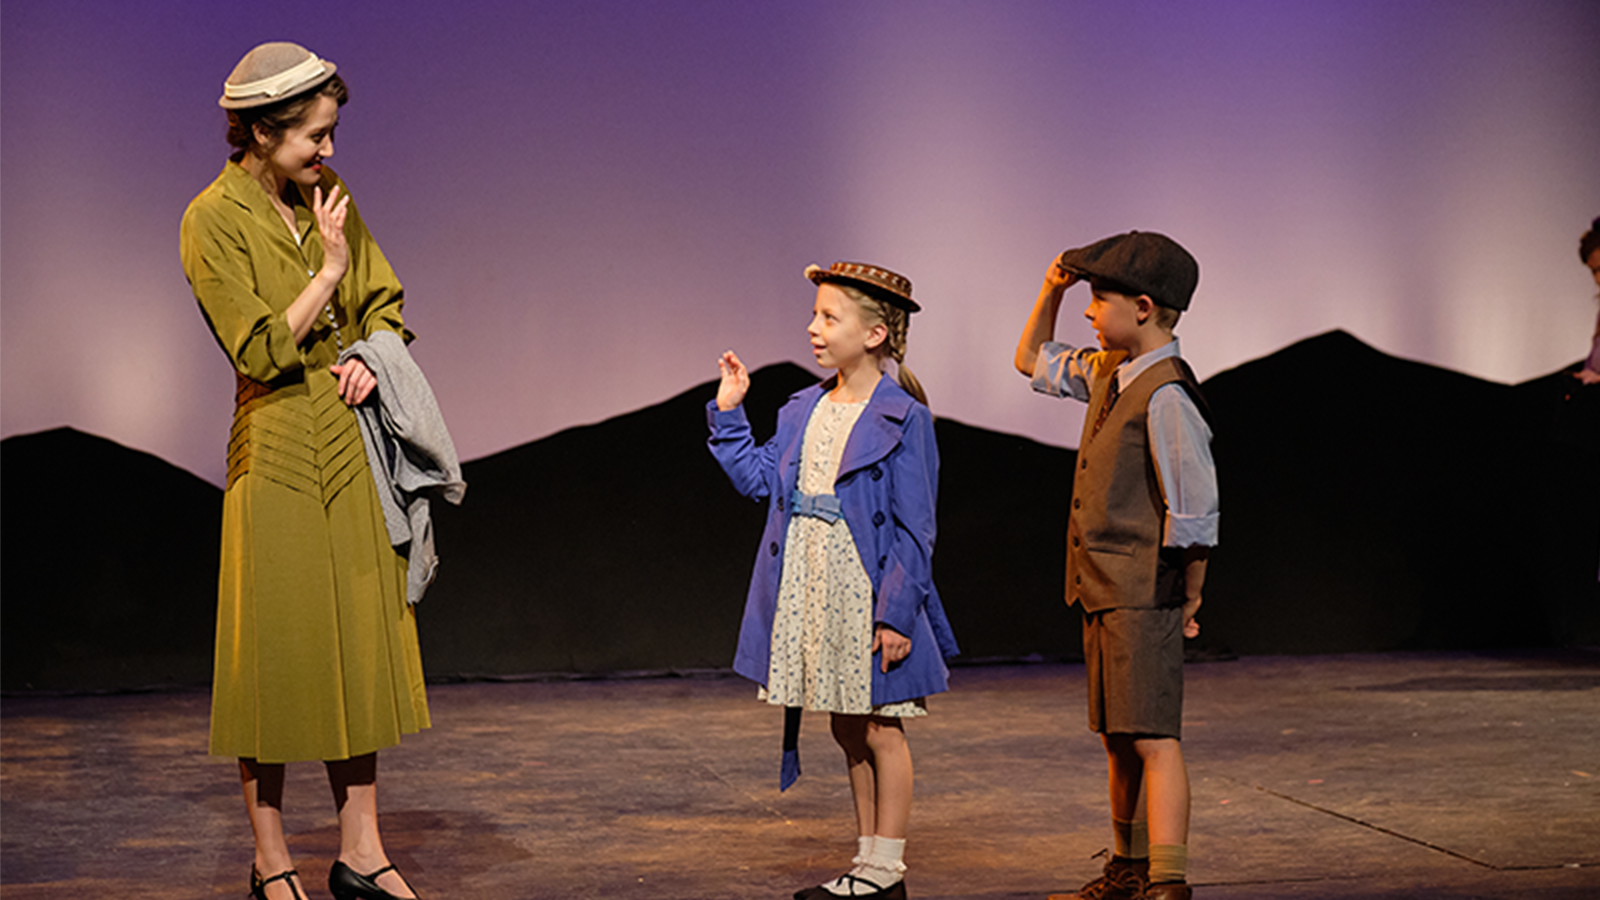 A woman on stage with two children